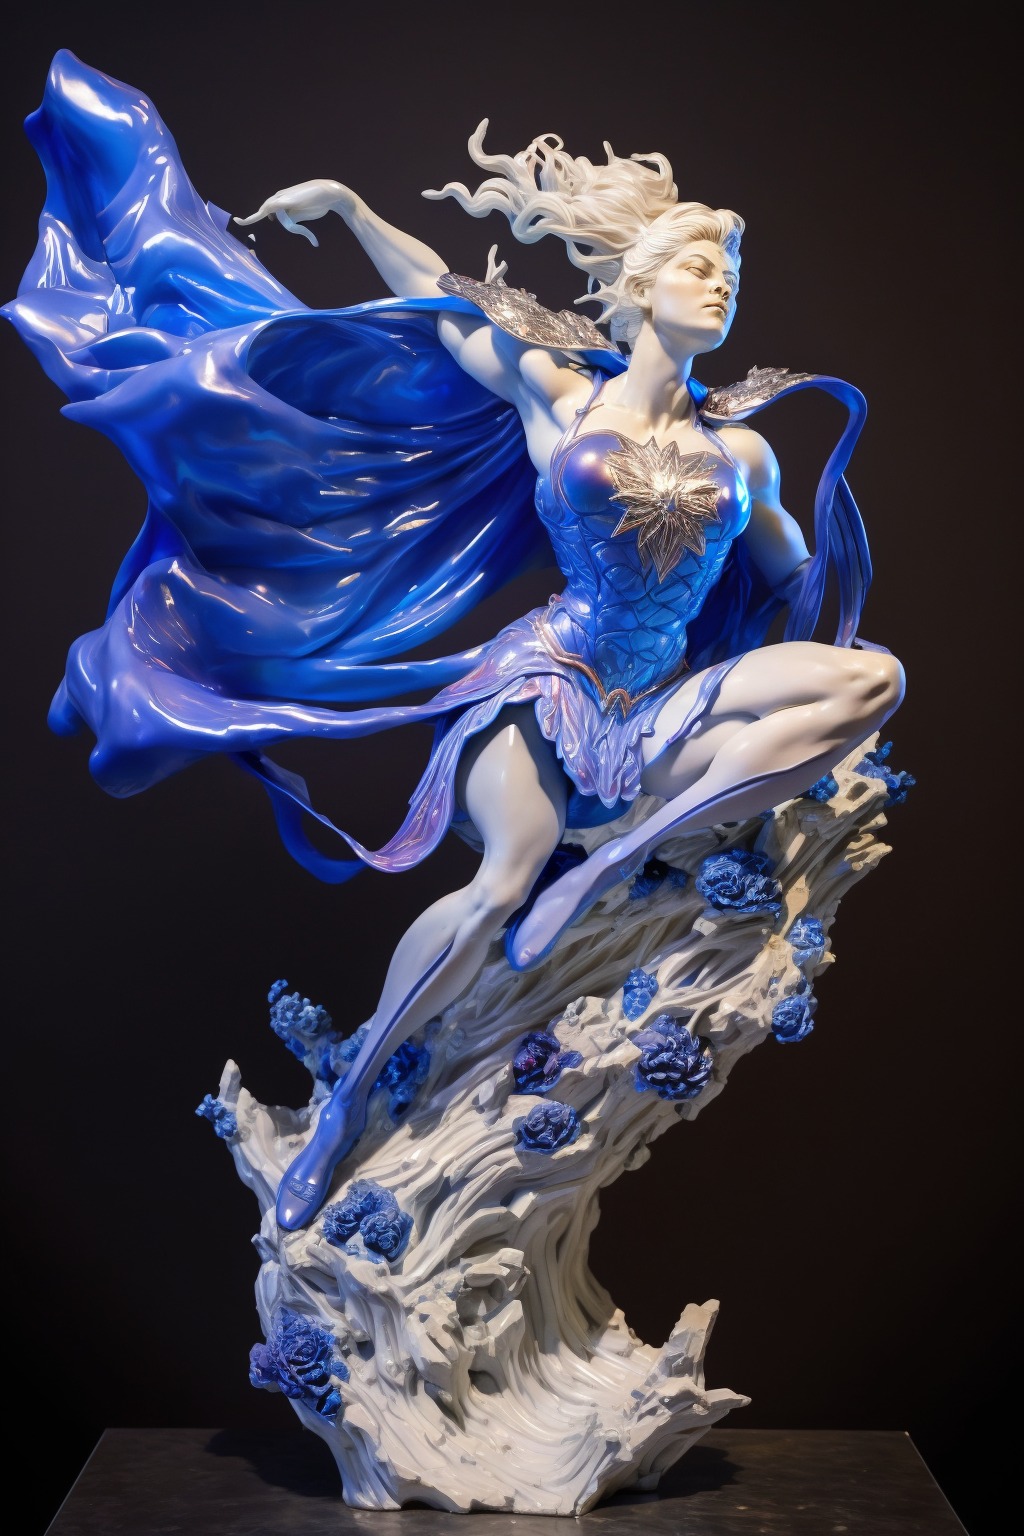 DC Superheroes & Villains as statues made of various material prompts (all with chrome inlets) - movingworl.com